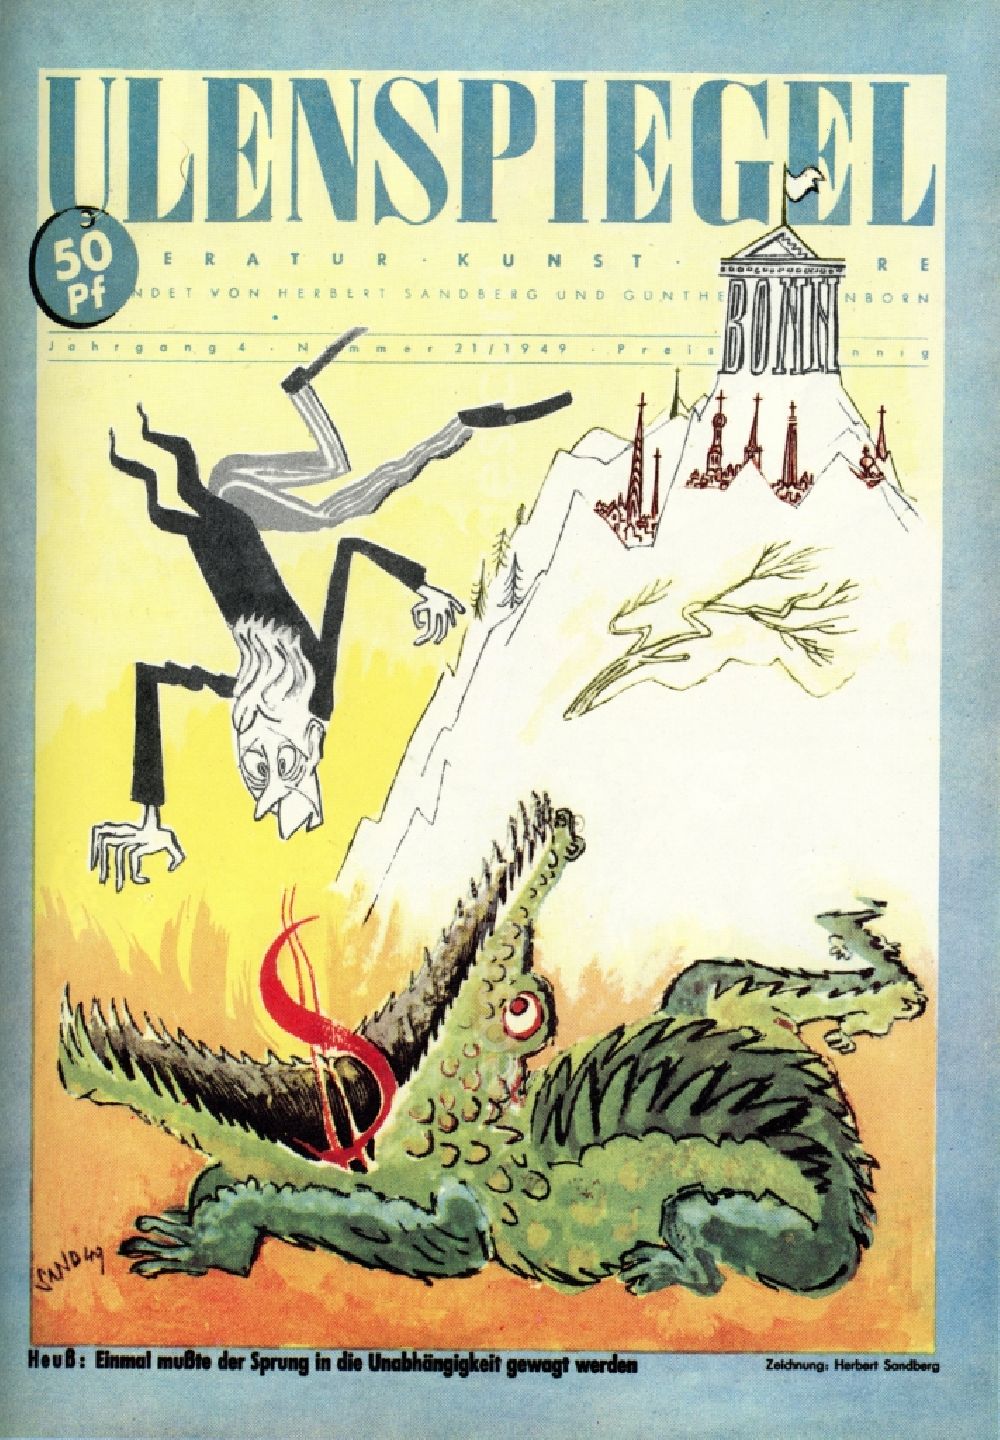 GDR picture archive: Berlin - Colored graphics Once the leap to the independece had to be ventured of the GDR artist Herbert Sandberg in Berlin, the former capital of the GDR, German Democratic Republic. Used on the cover of the Ulenspiegel (year 4 No. 21)